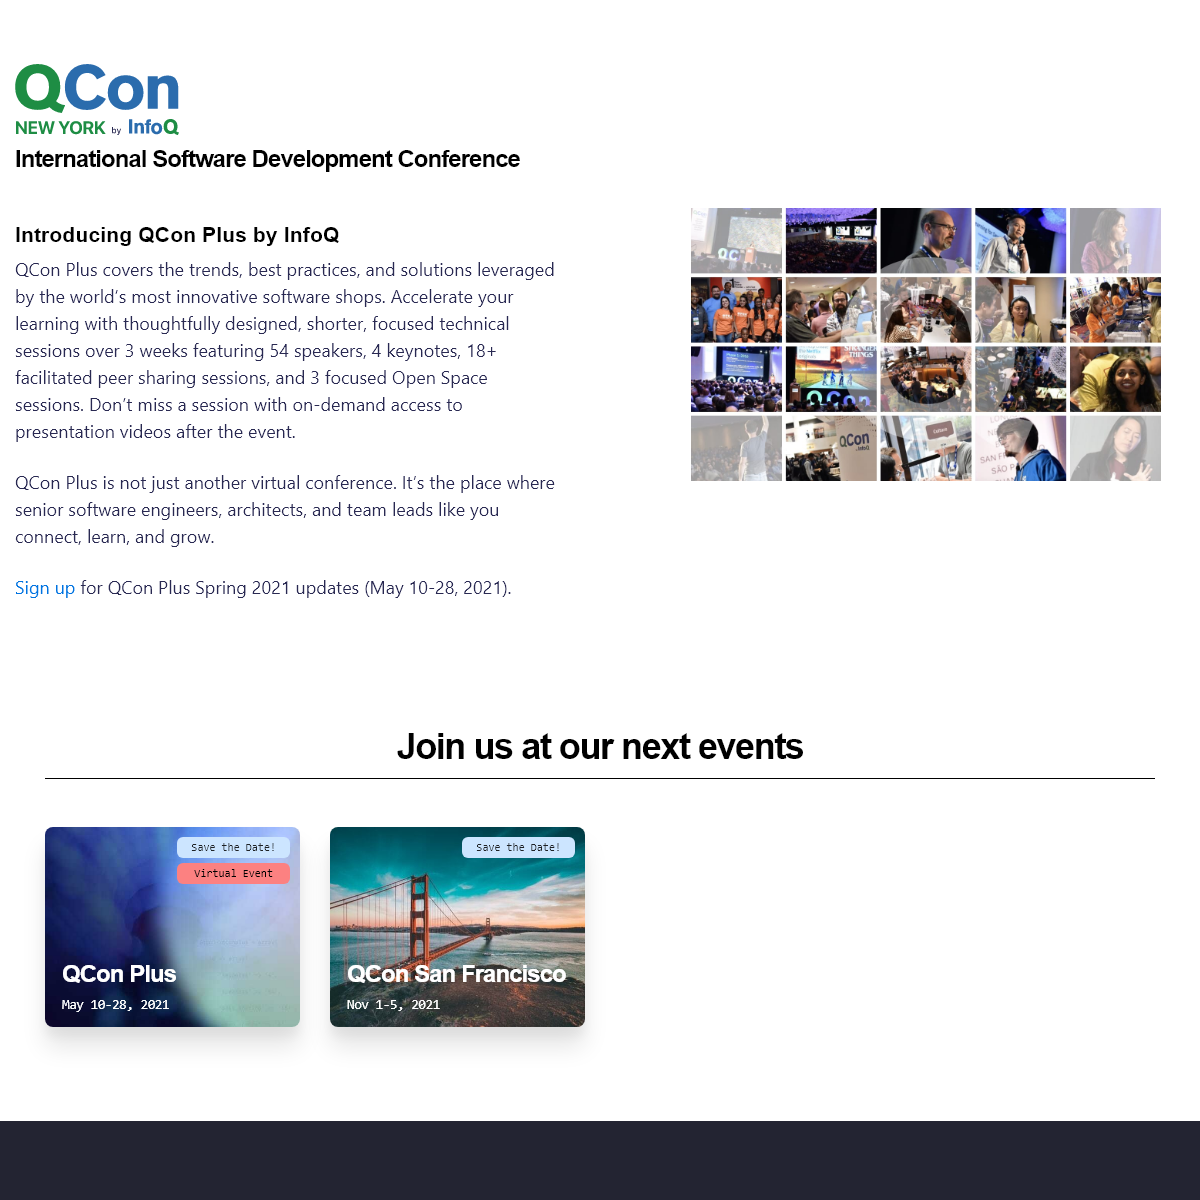 A complete backup of qconnewyork.com